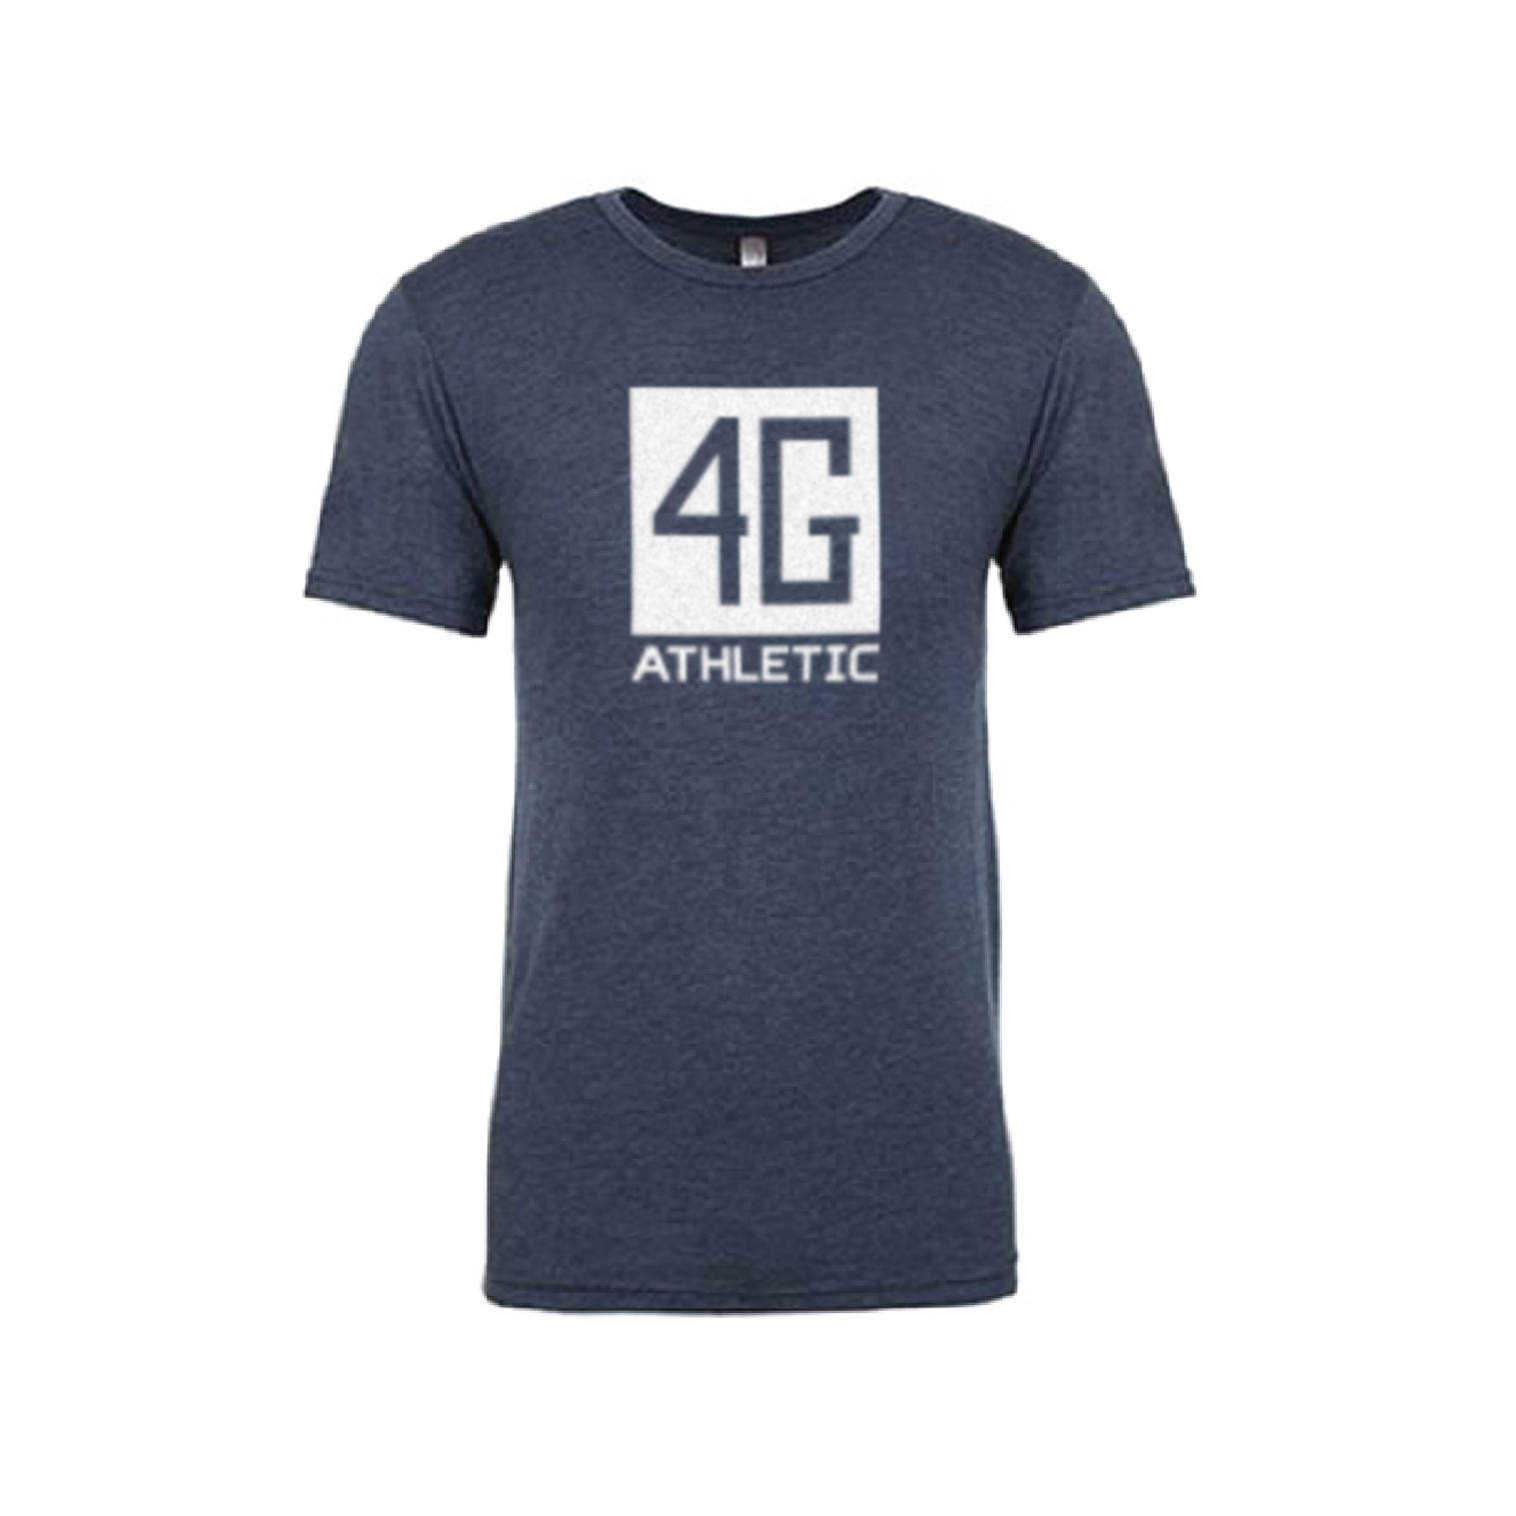 Men's Tshirt Blue for sale from 4G Athletic